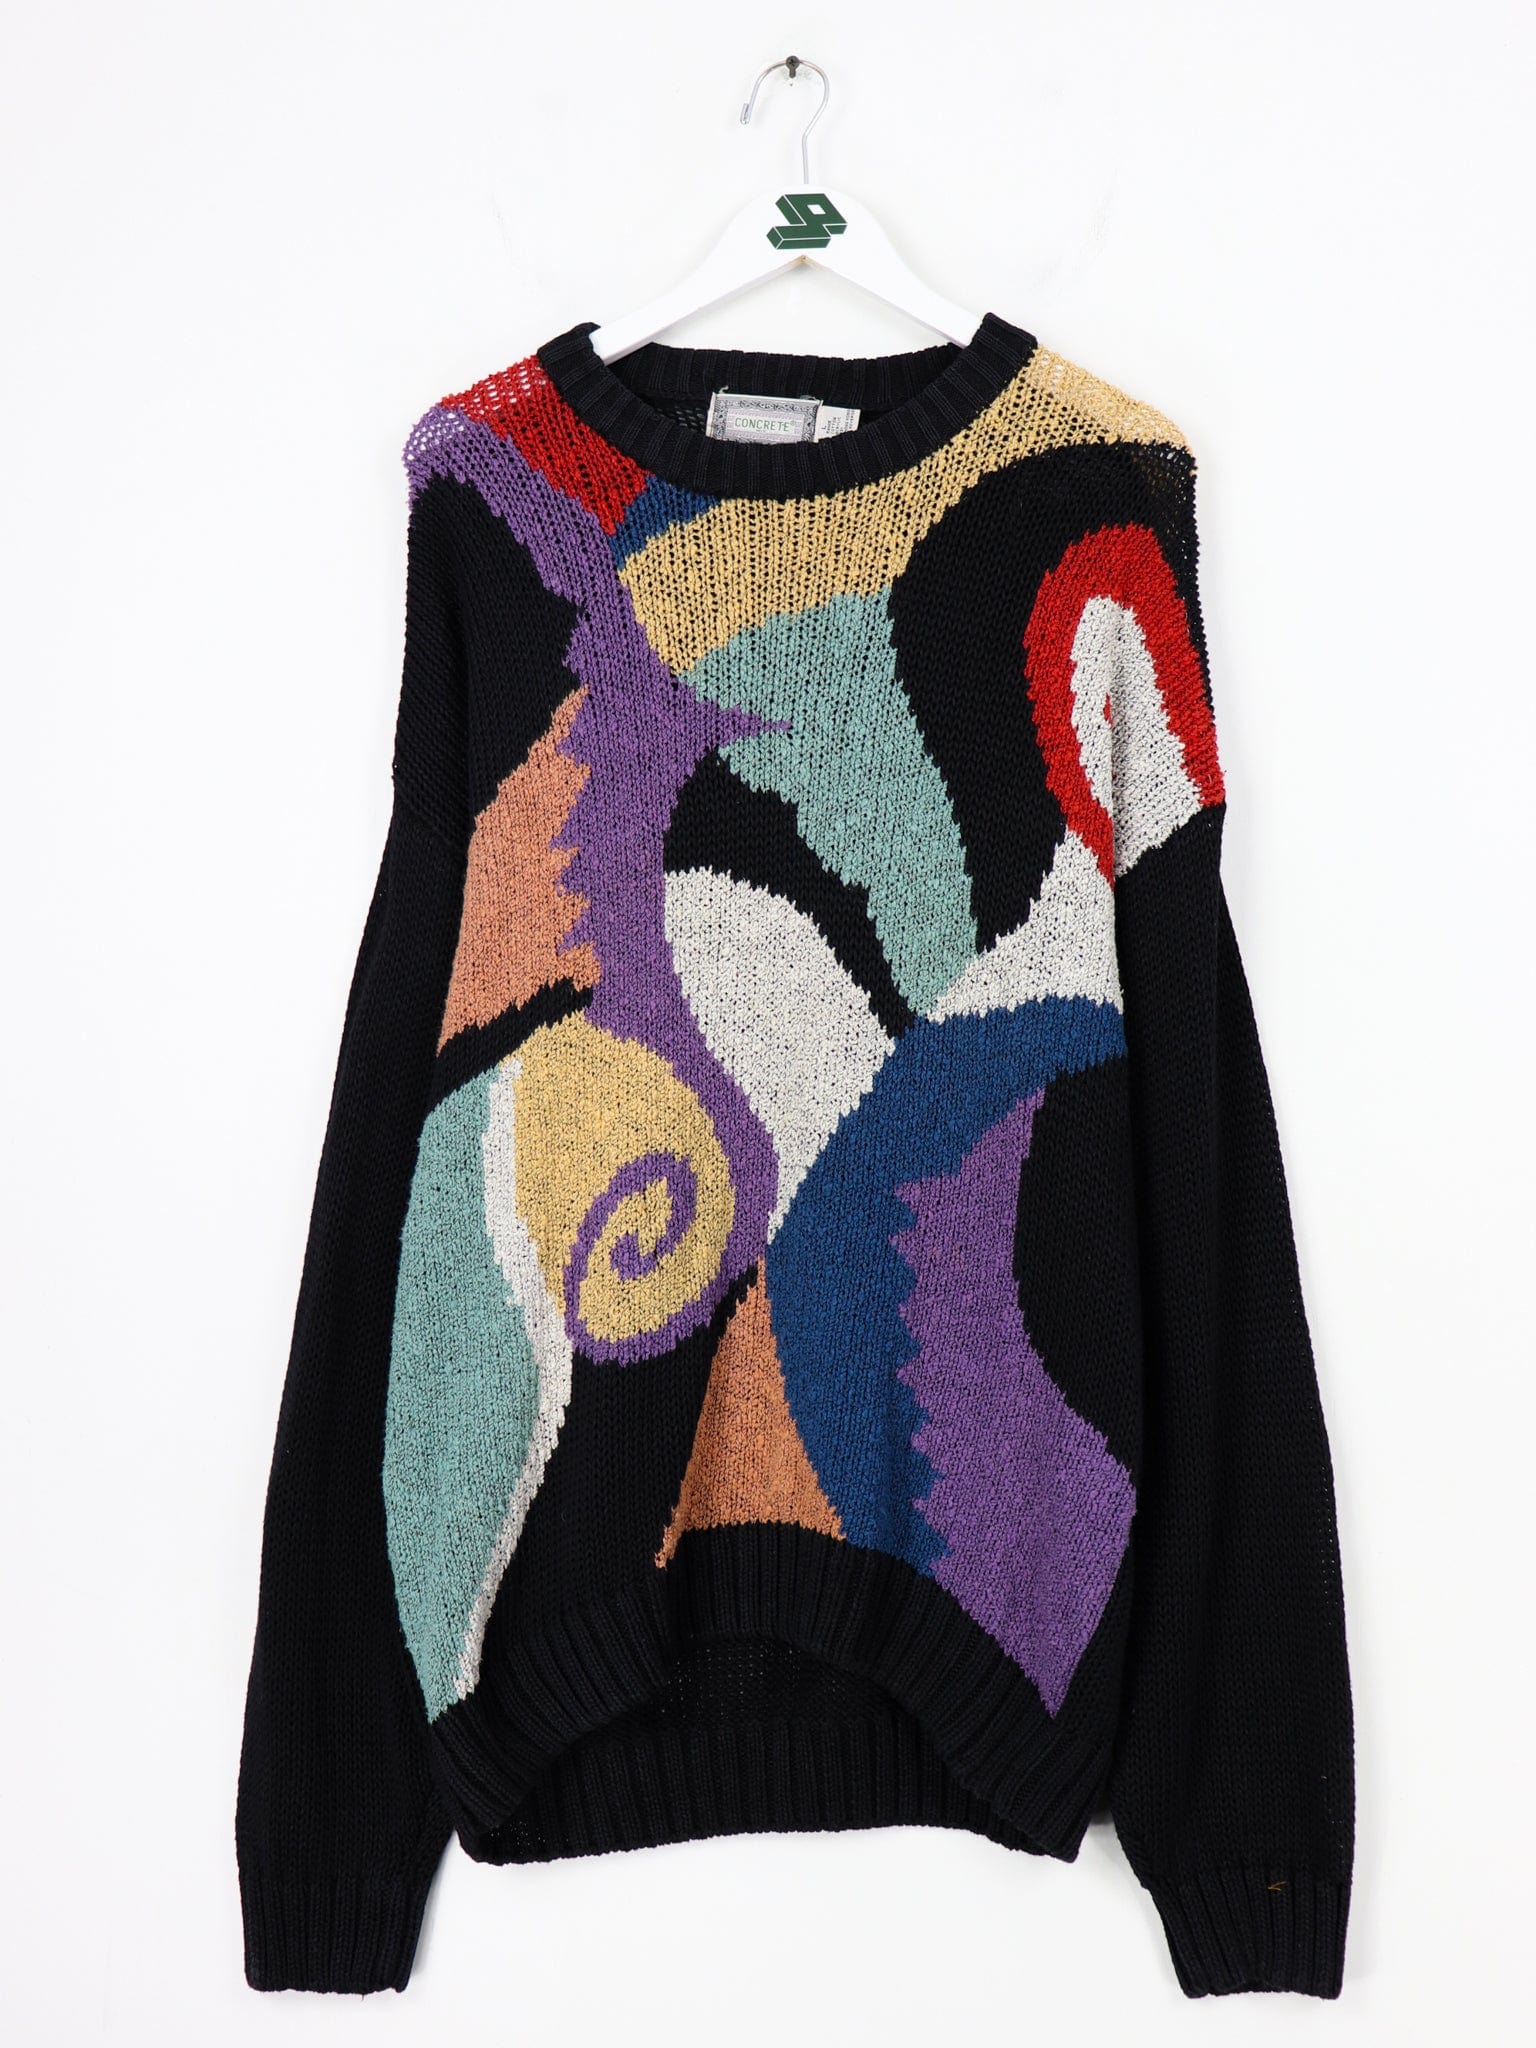 Vintage Concrete Abstract Knit Sweater Size Large Fits Long Oversized